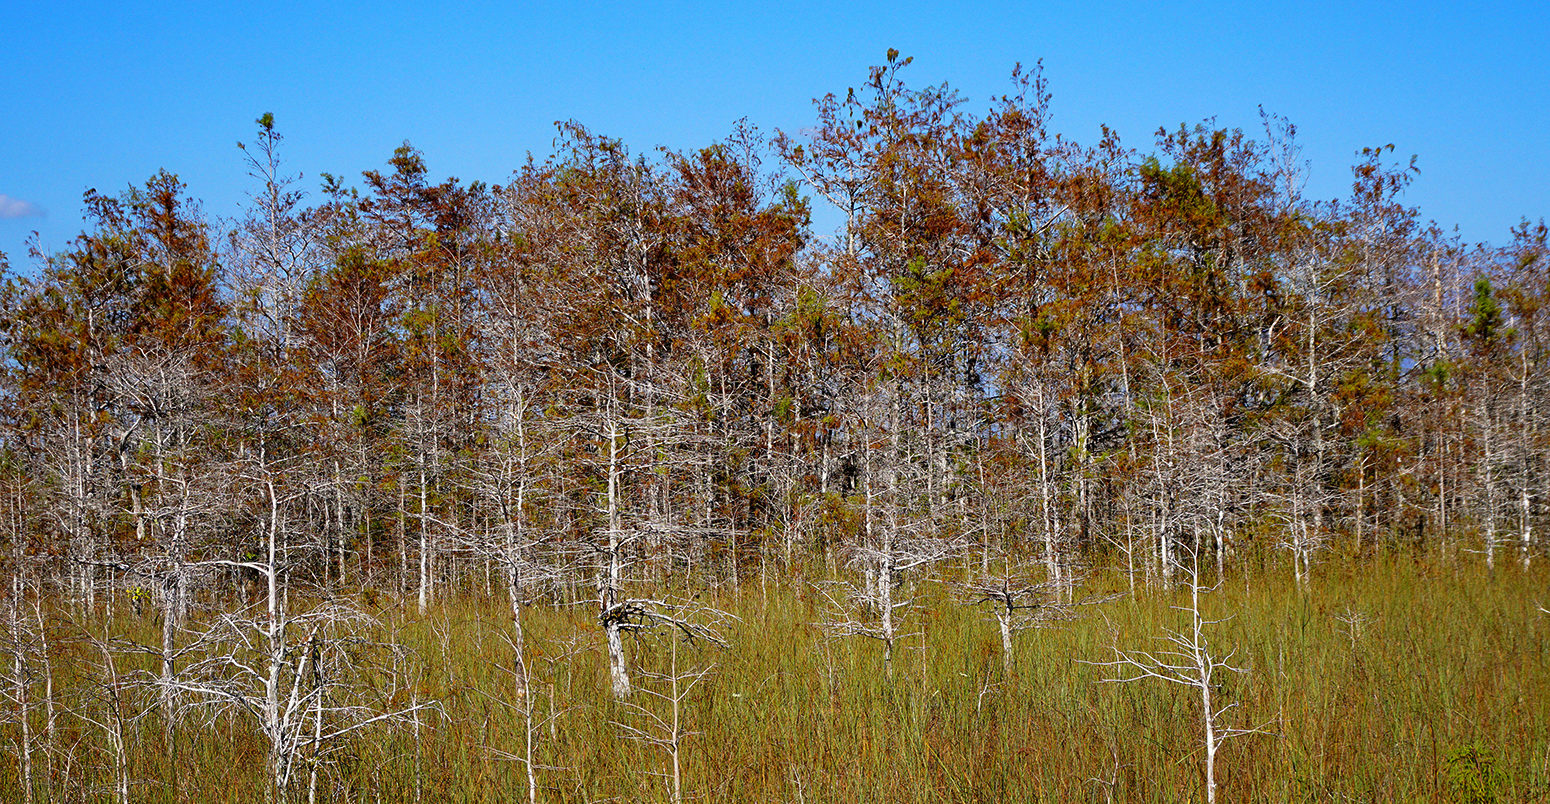 Everglades National Park dead trees and grasses.